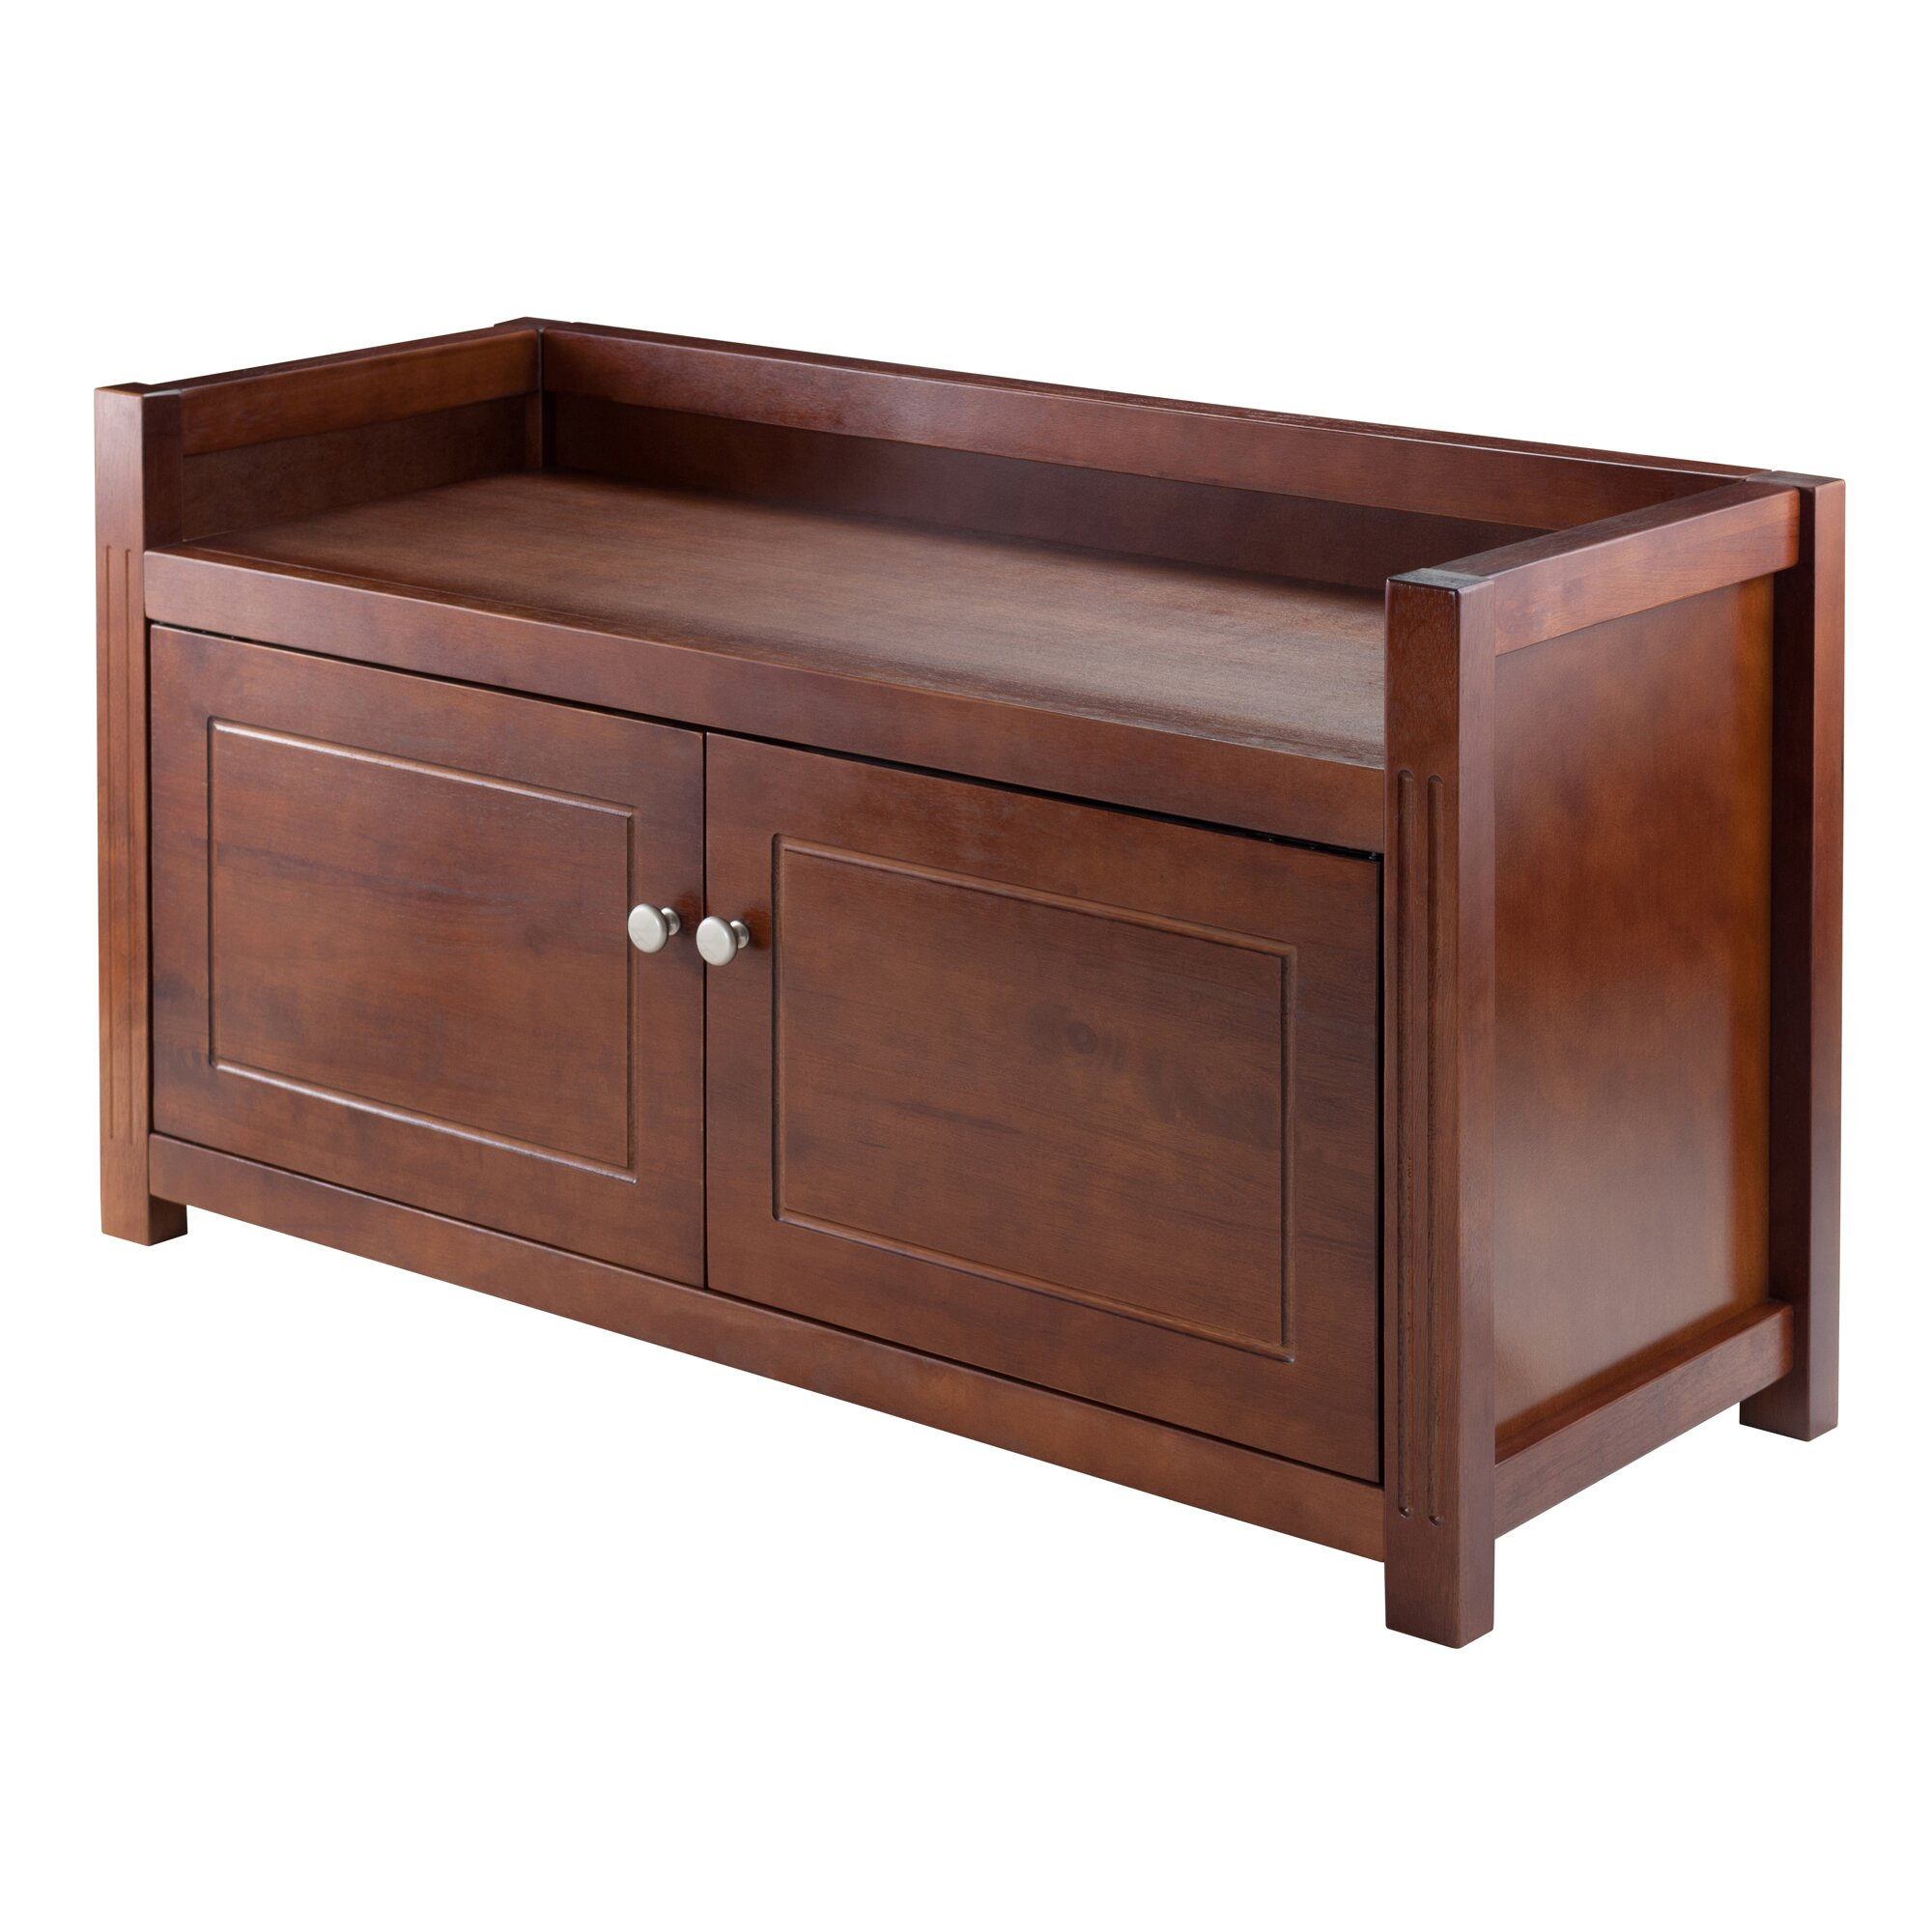 Storage Bench Wood
 Winsome Wooden Storage Bench & Reviews